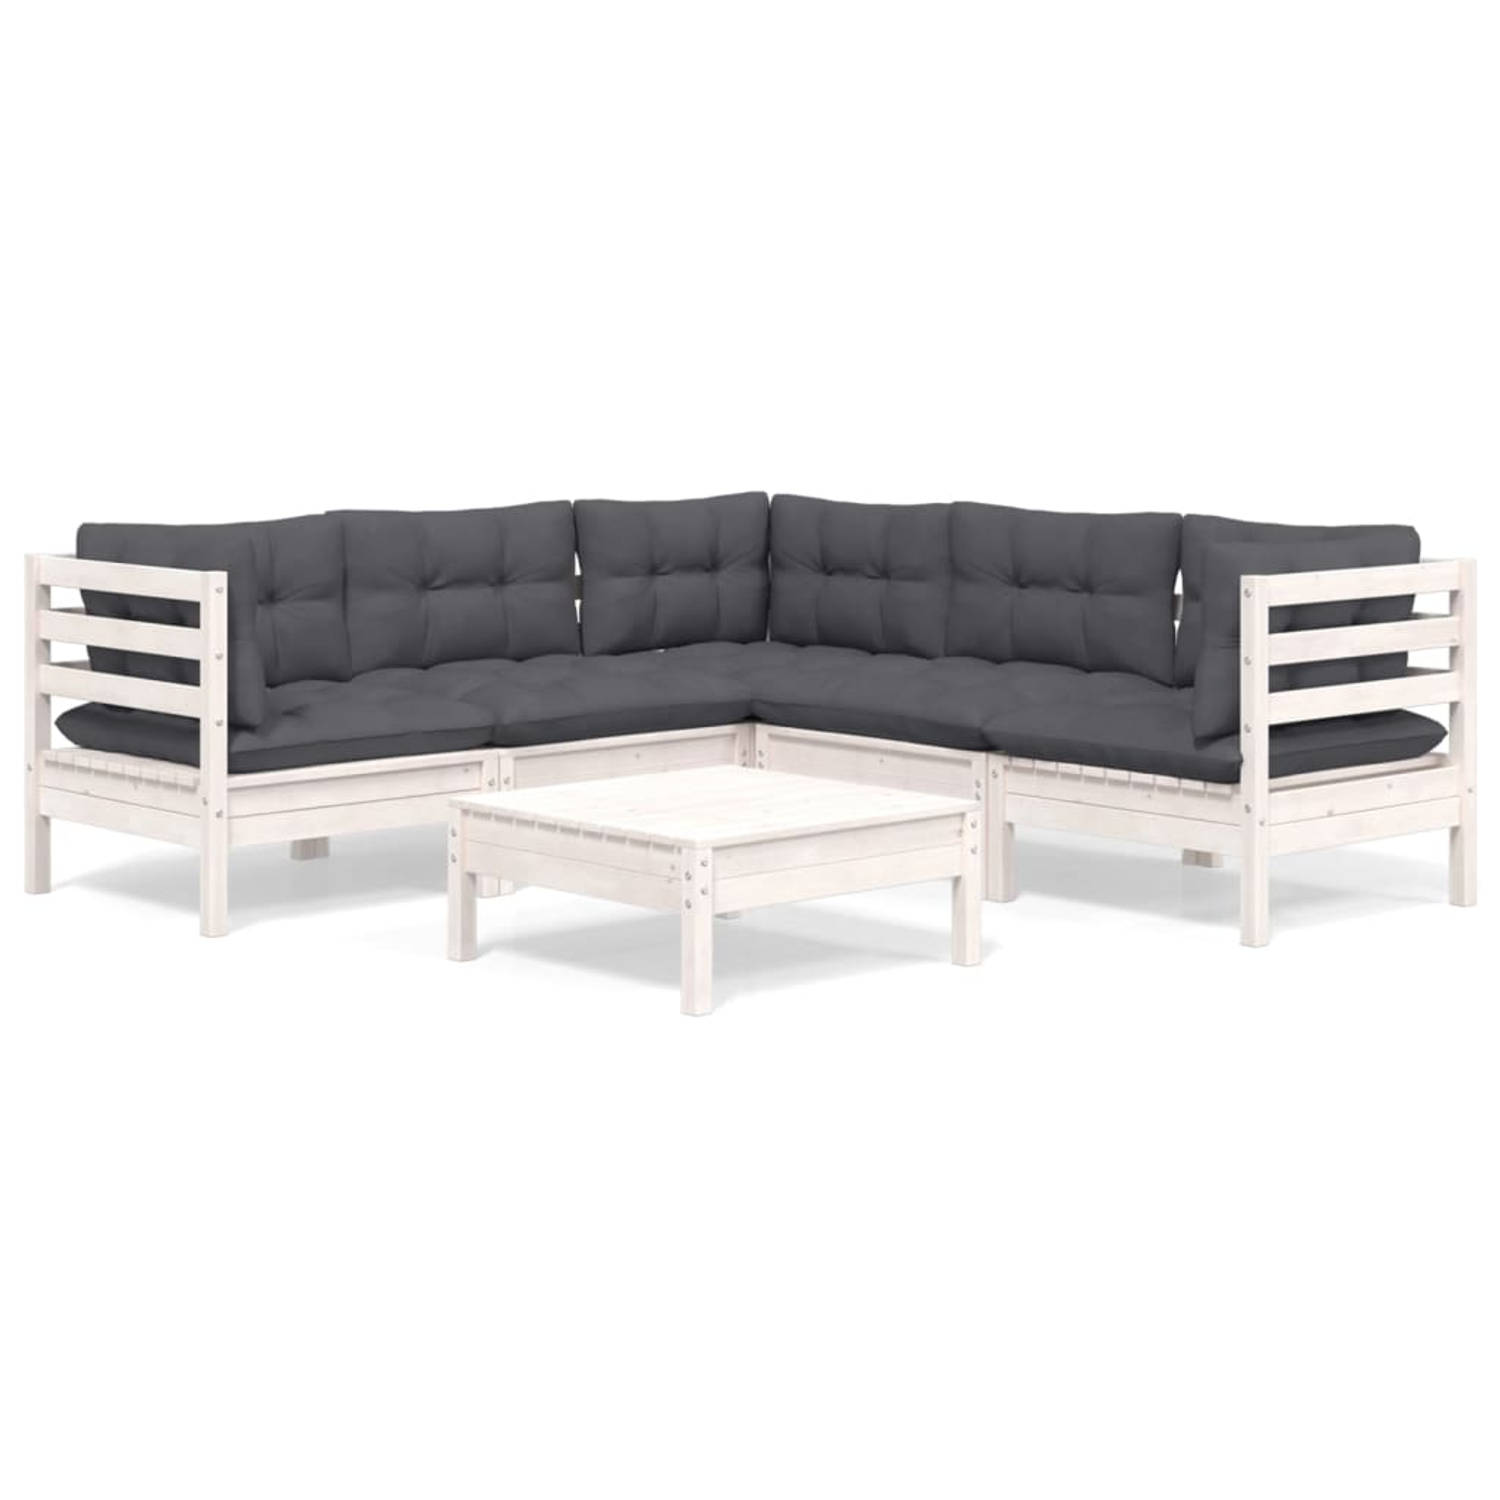 The Living Store Loungeset Grenenhout - Wit - 63.5x63.5x62.5 cm - Antraciet kussen